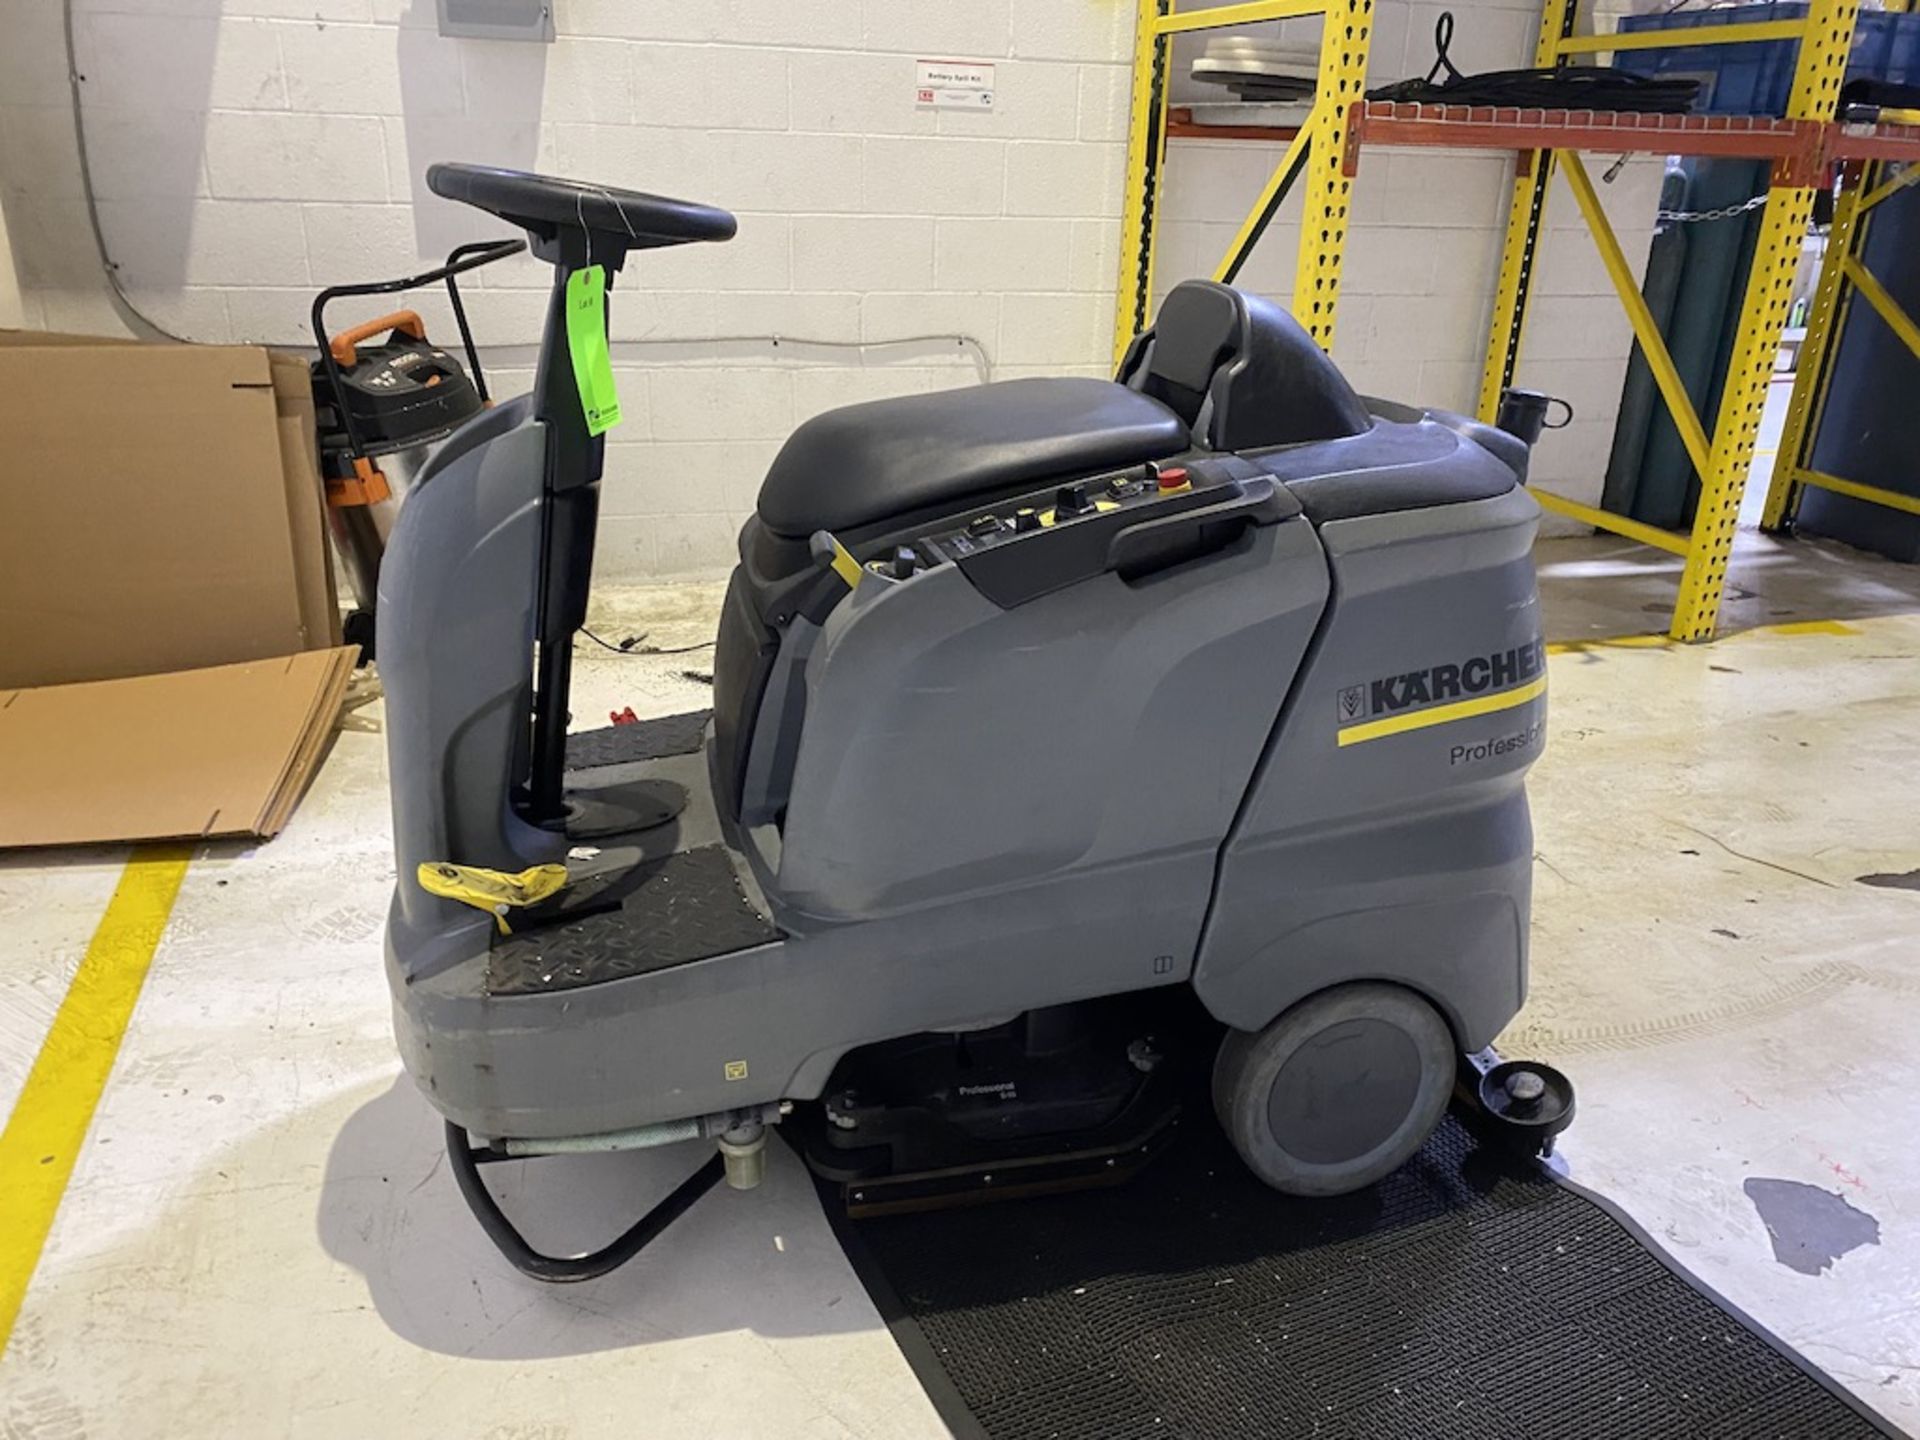 Karcher Ride-On Floor Scrubber with Charger